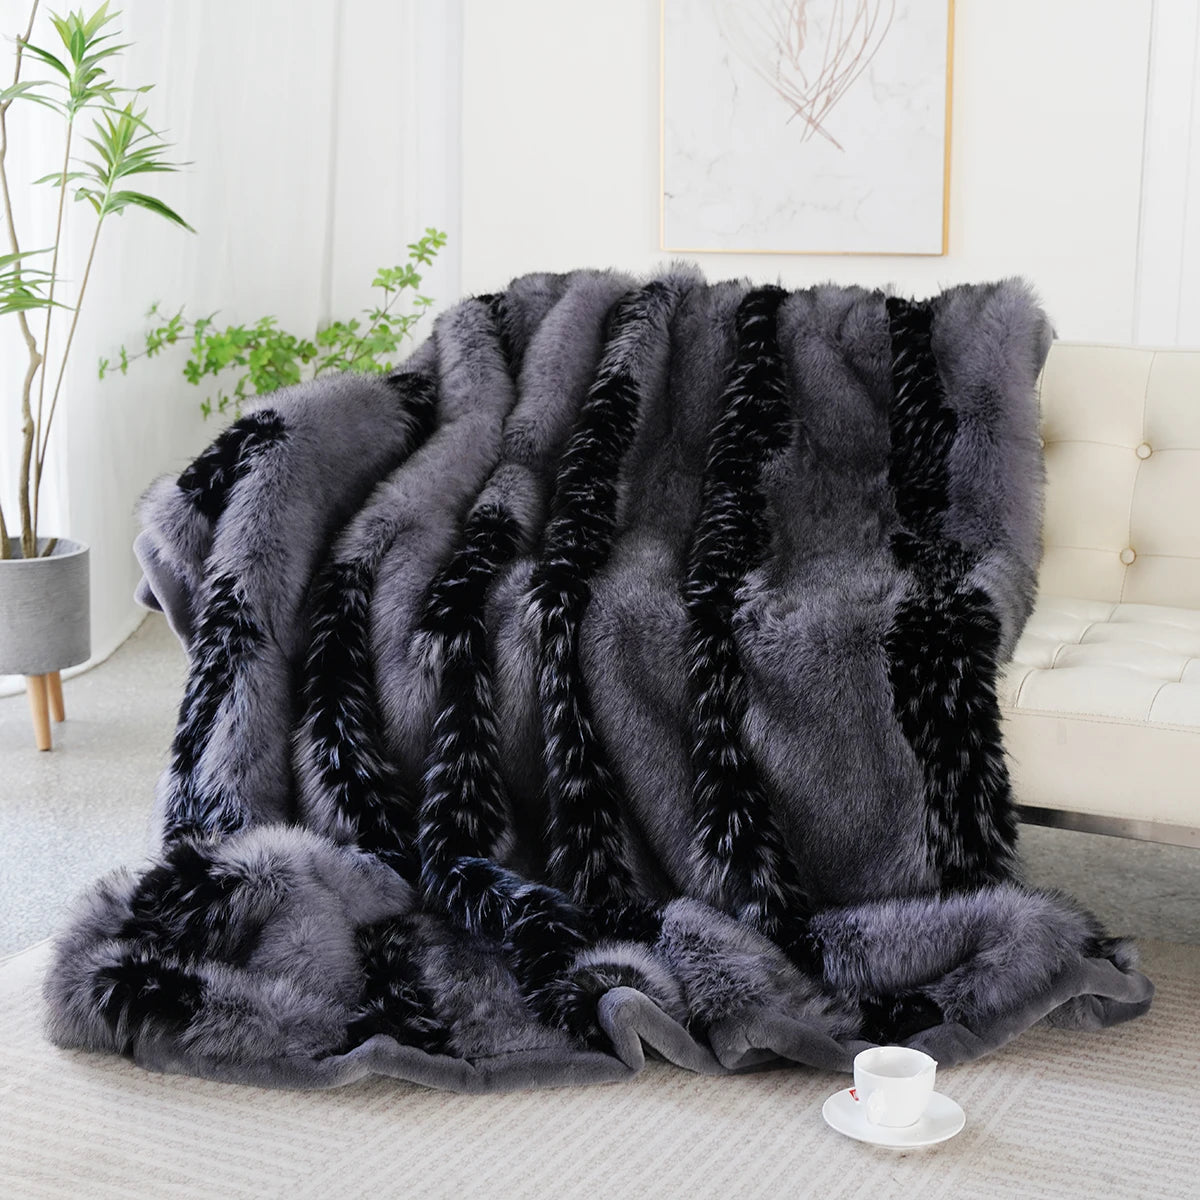 Luxury Faux Fur Fluffy No Hair Loss Blankets for Beds Sofa Cover Living Room Bedroom Natural Soft High-end Decorative Blanket 